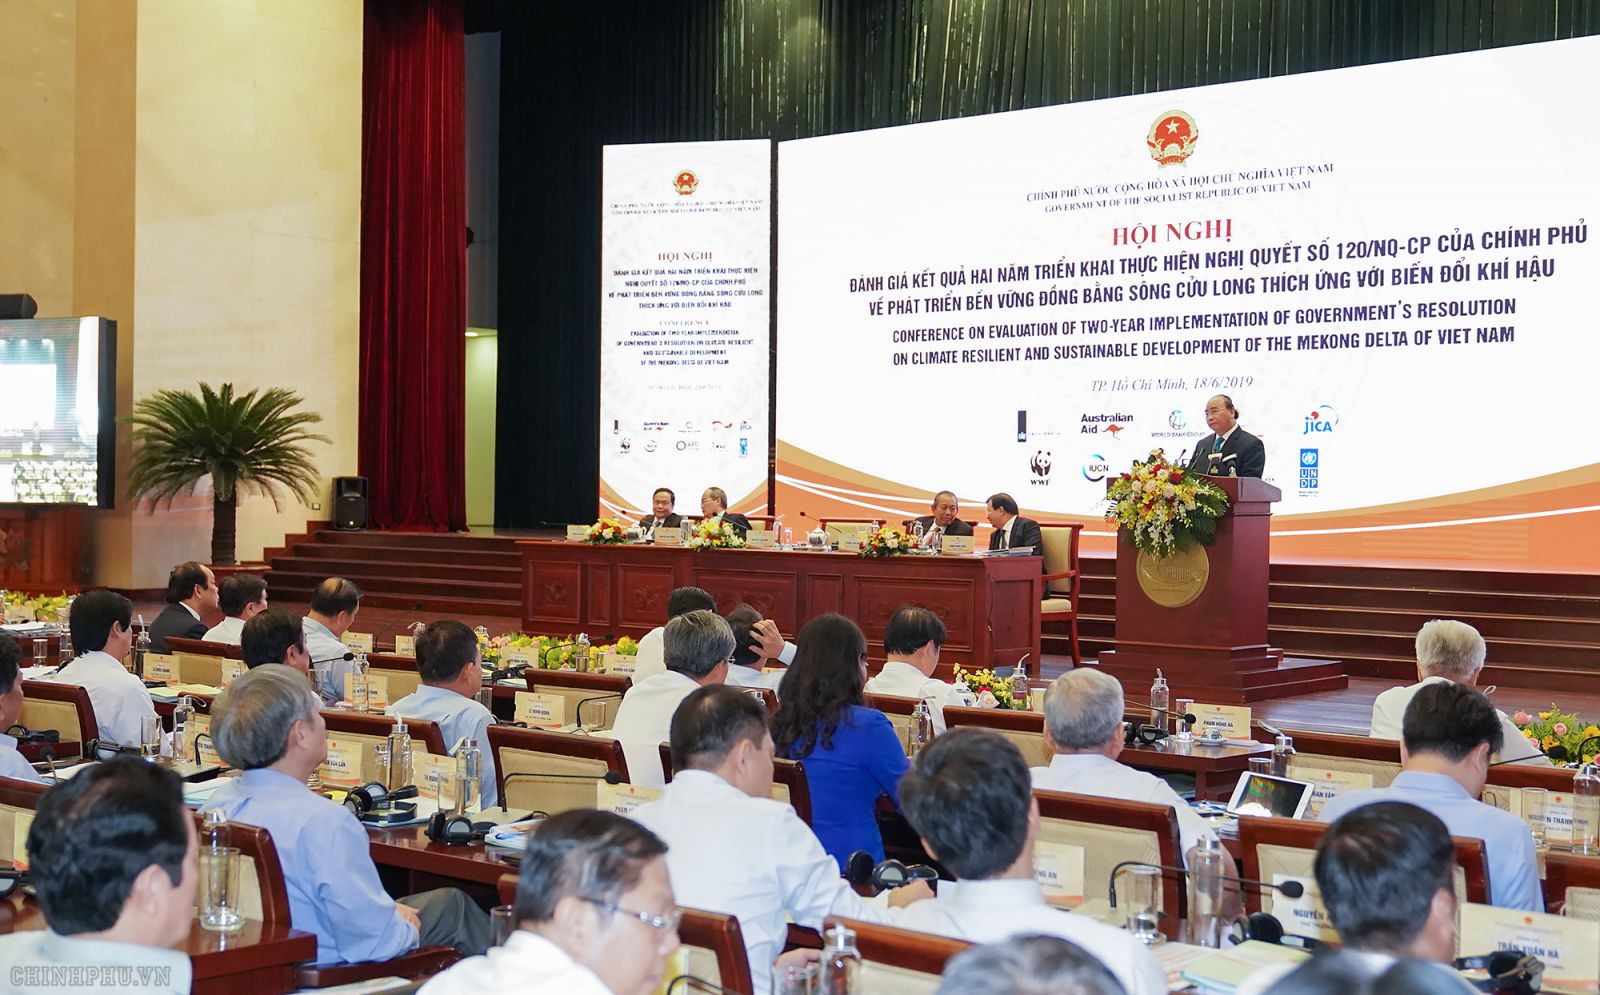 A view of the thematic forum on master planning, regional coordination mechanism and investment attraction for the Mekong Delta. (Source: VGP)